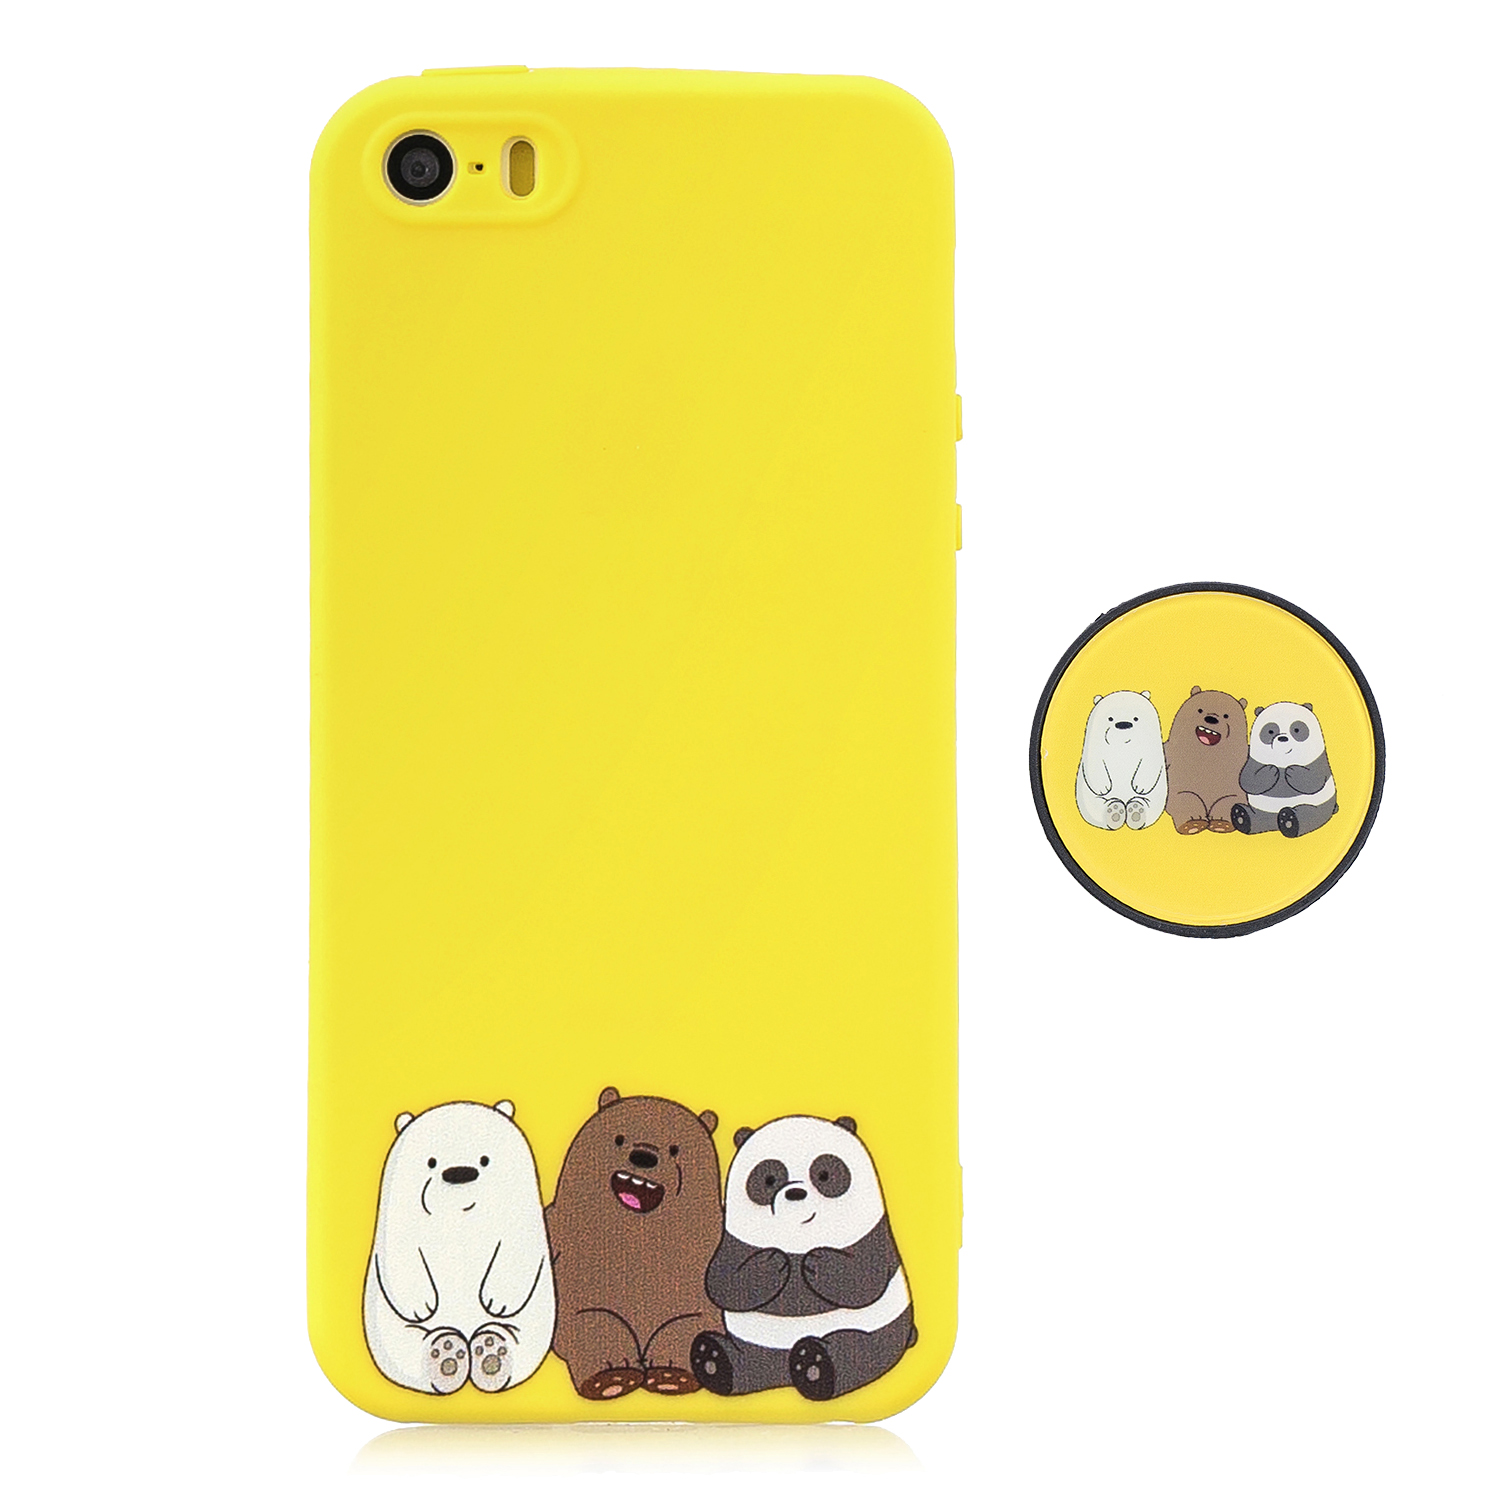 iphone 5c yellow case for girls